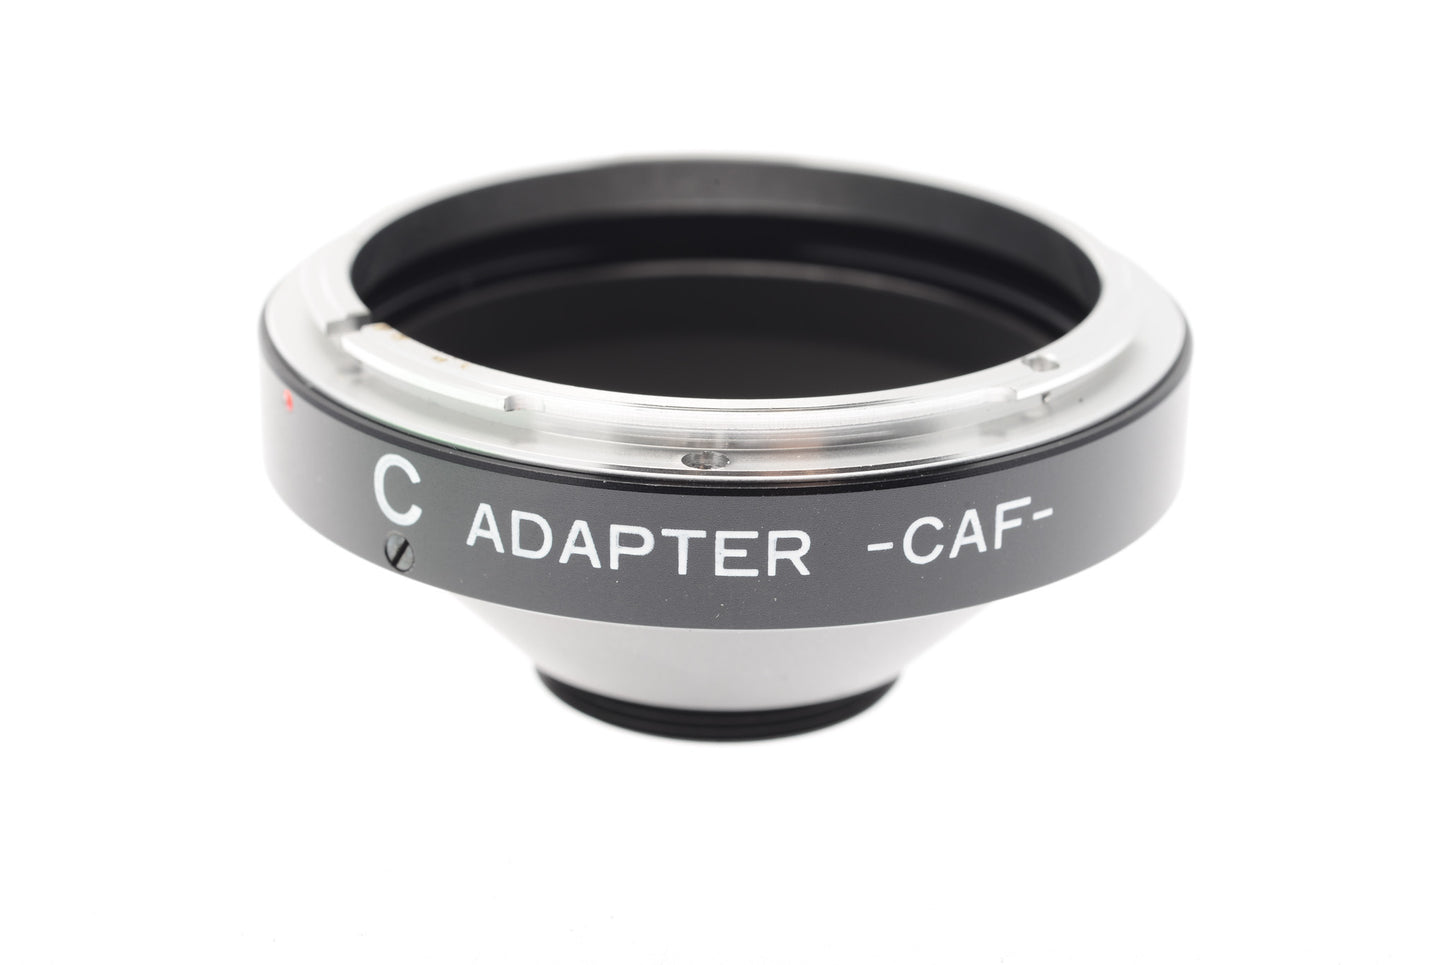 Panagor Canon FD - C-mount - Lens Adapter